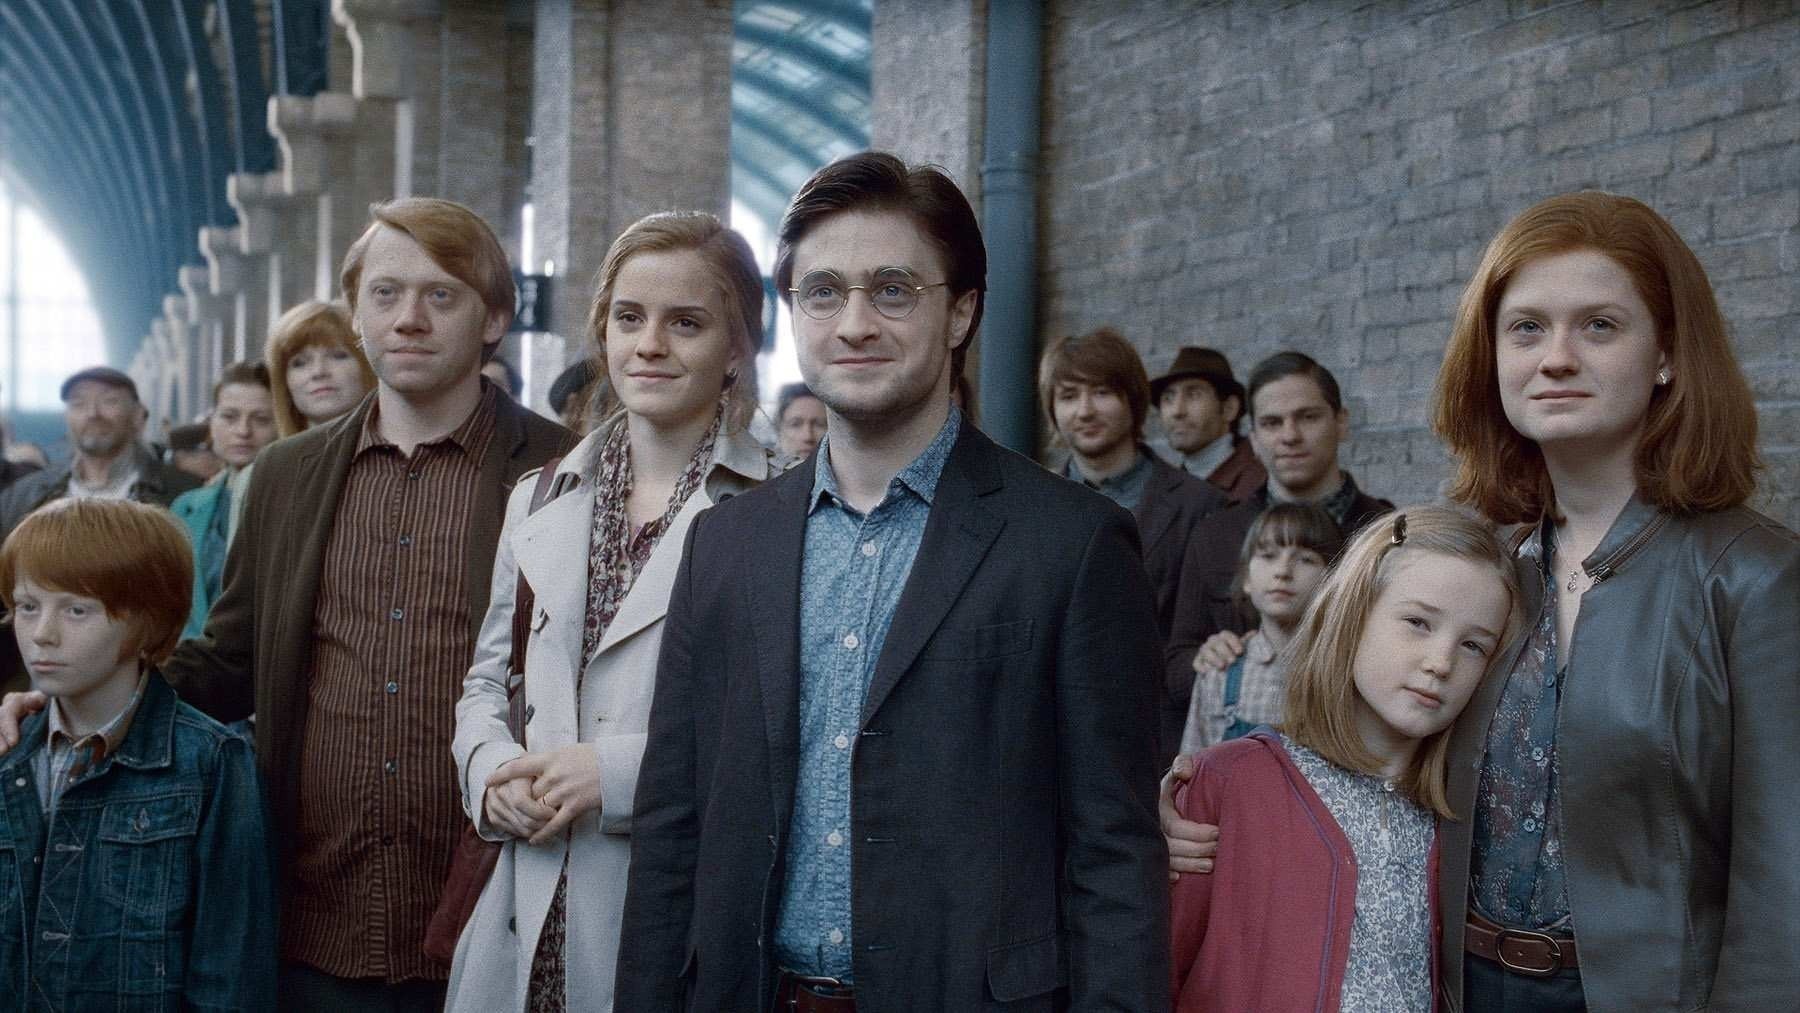 Ron, Hermione, Harry, and Ginny watch their children go off to Hogwarts in the final scene of the Harry Potter film franchise. 